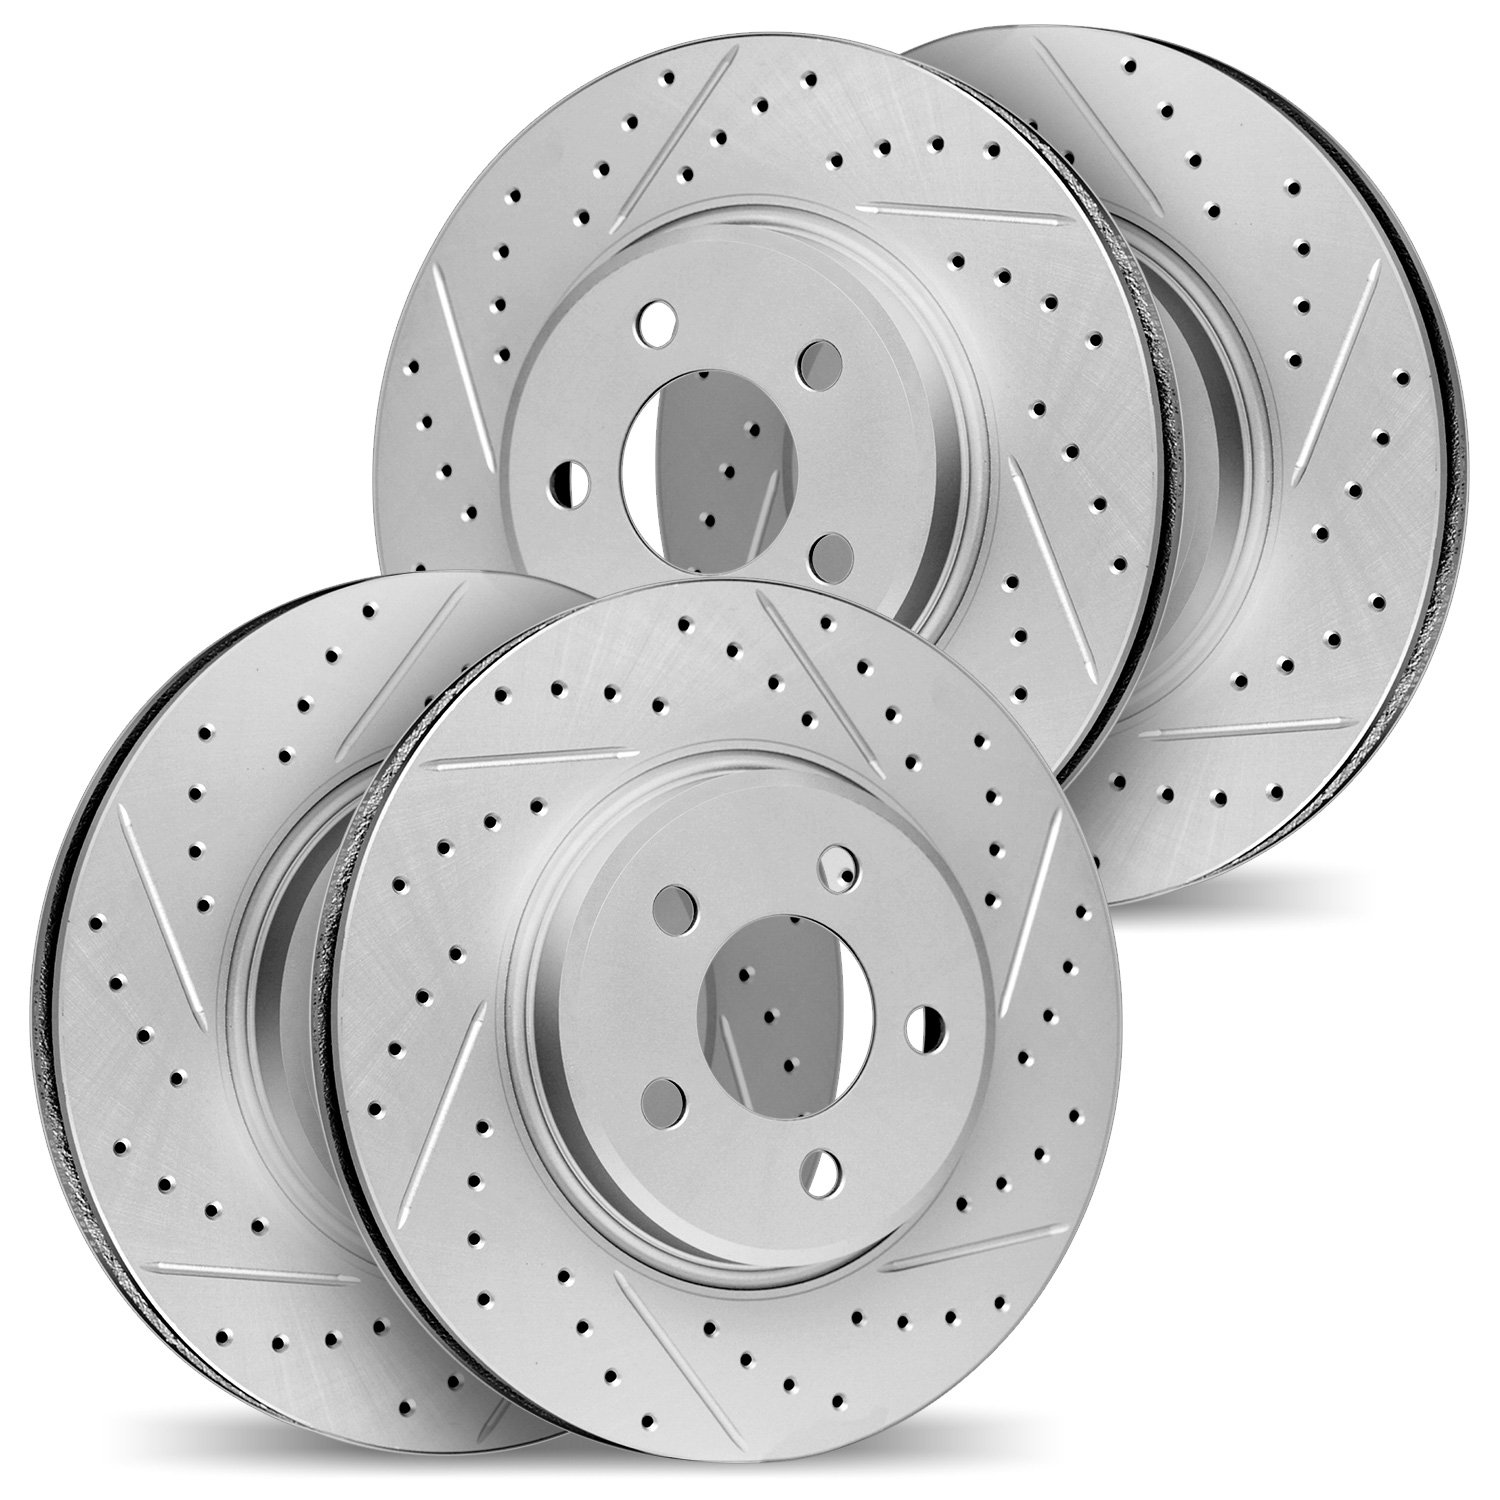 2004-13037 Geoperformance Drilled/Slotted Brake Rotors, Fits Select Subaru, Position: Front and Rear